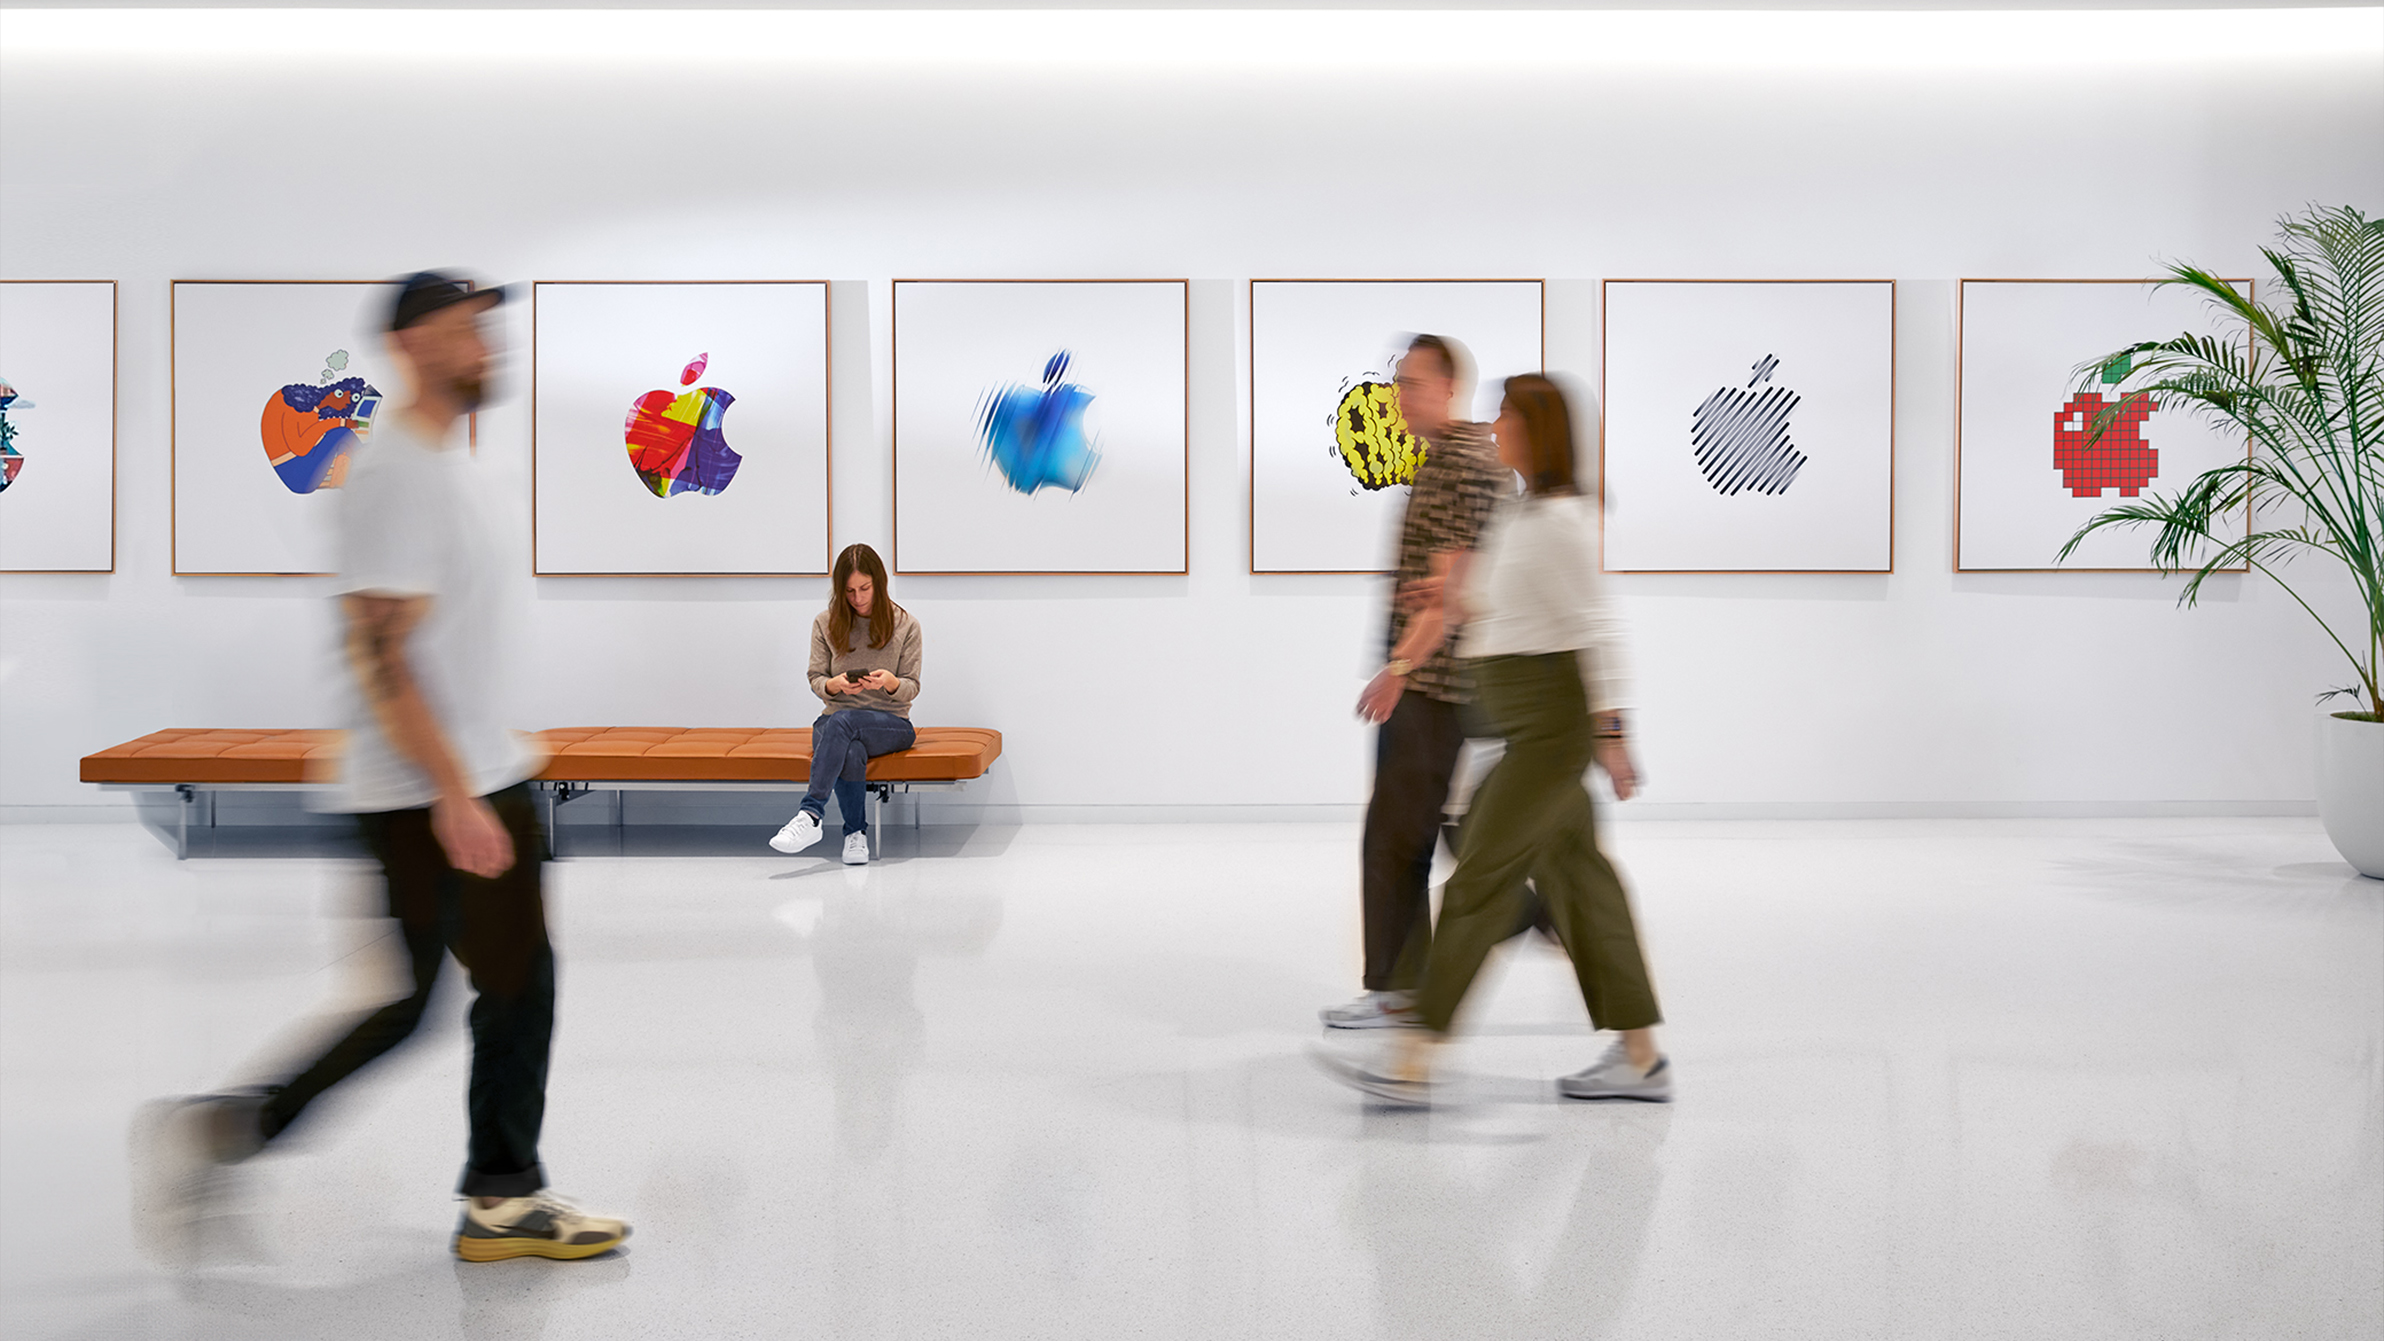 Three Apple colleagues walking past an interior wall with colourful Apple logos, and a fourth employee sitting on a bench.